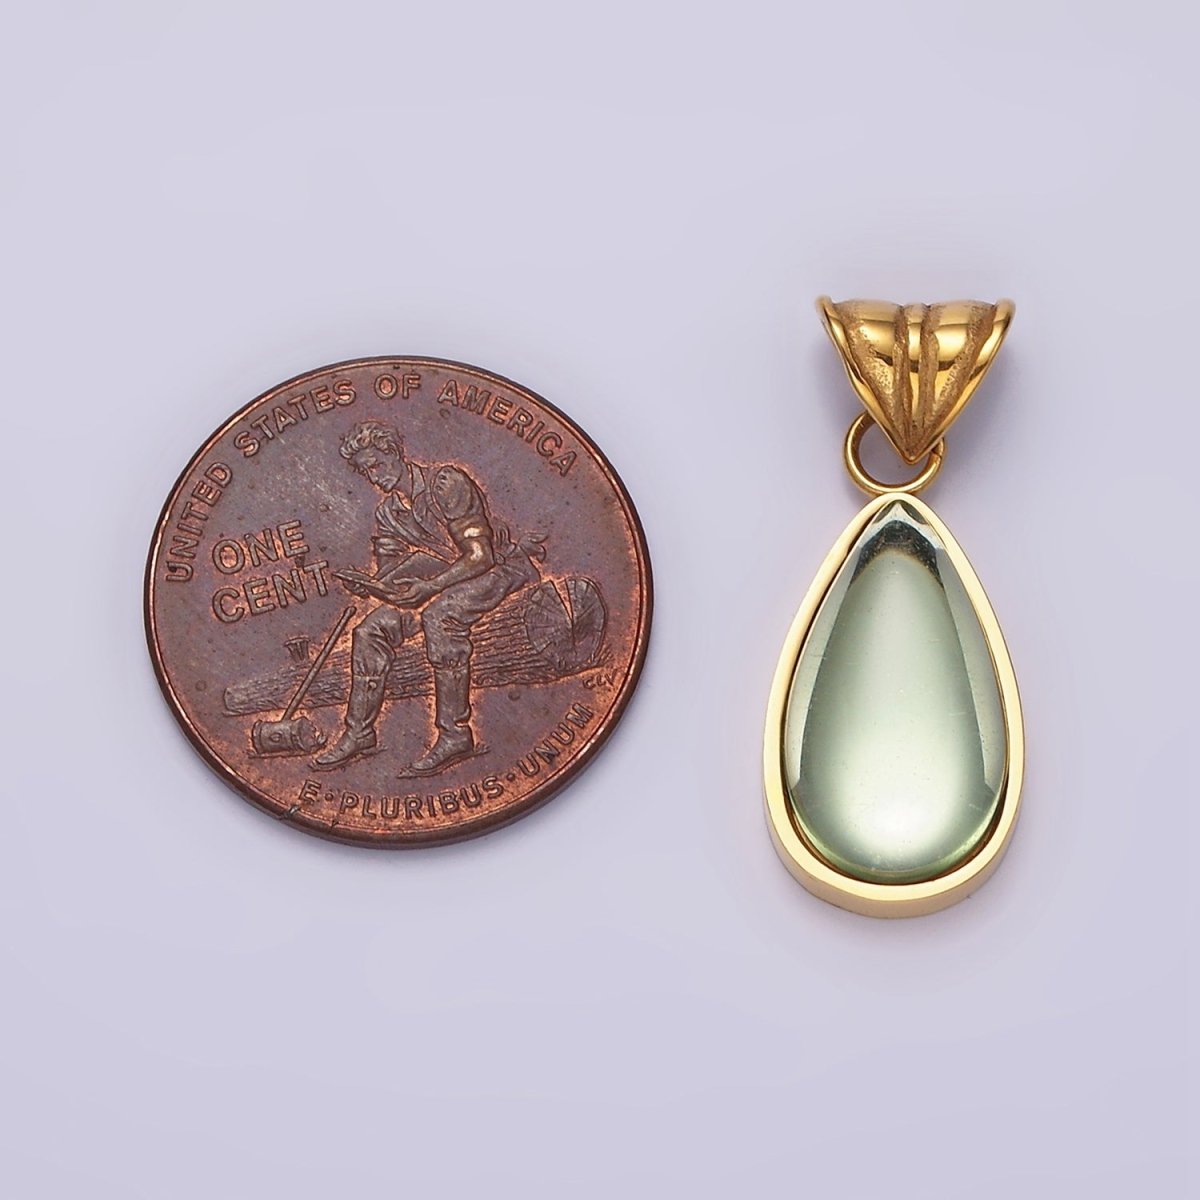 Stainless Steel Gold Tear Drop Green Charm Pear Pendant Charm for Necklace Bracelet Drop Jewelry | P-834 - DLUXCA